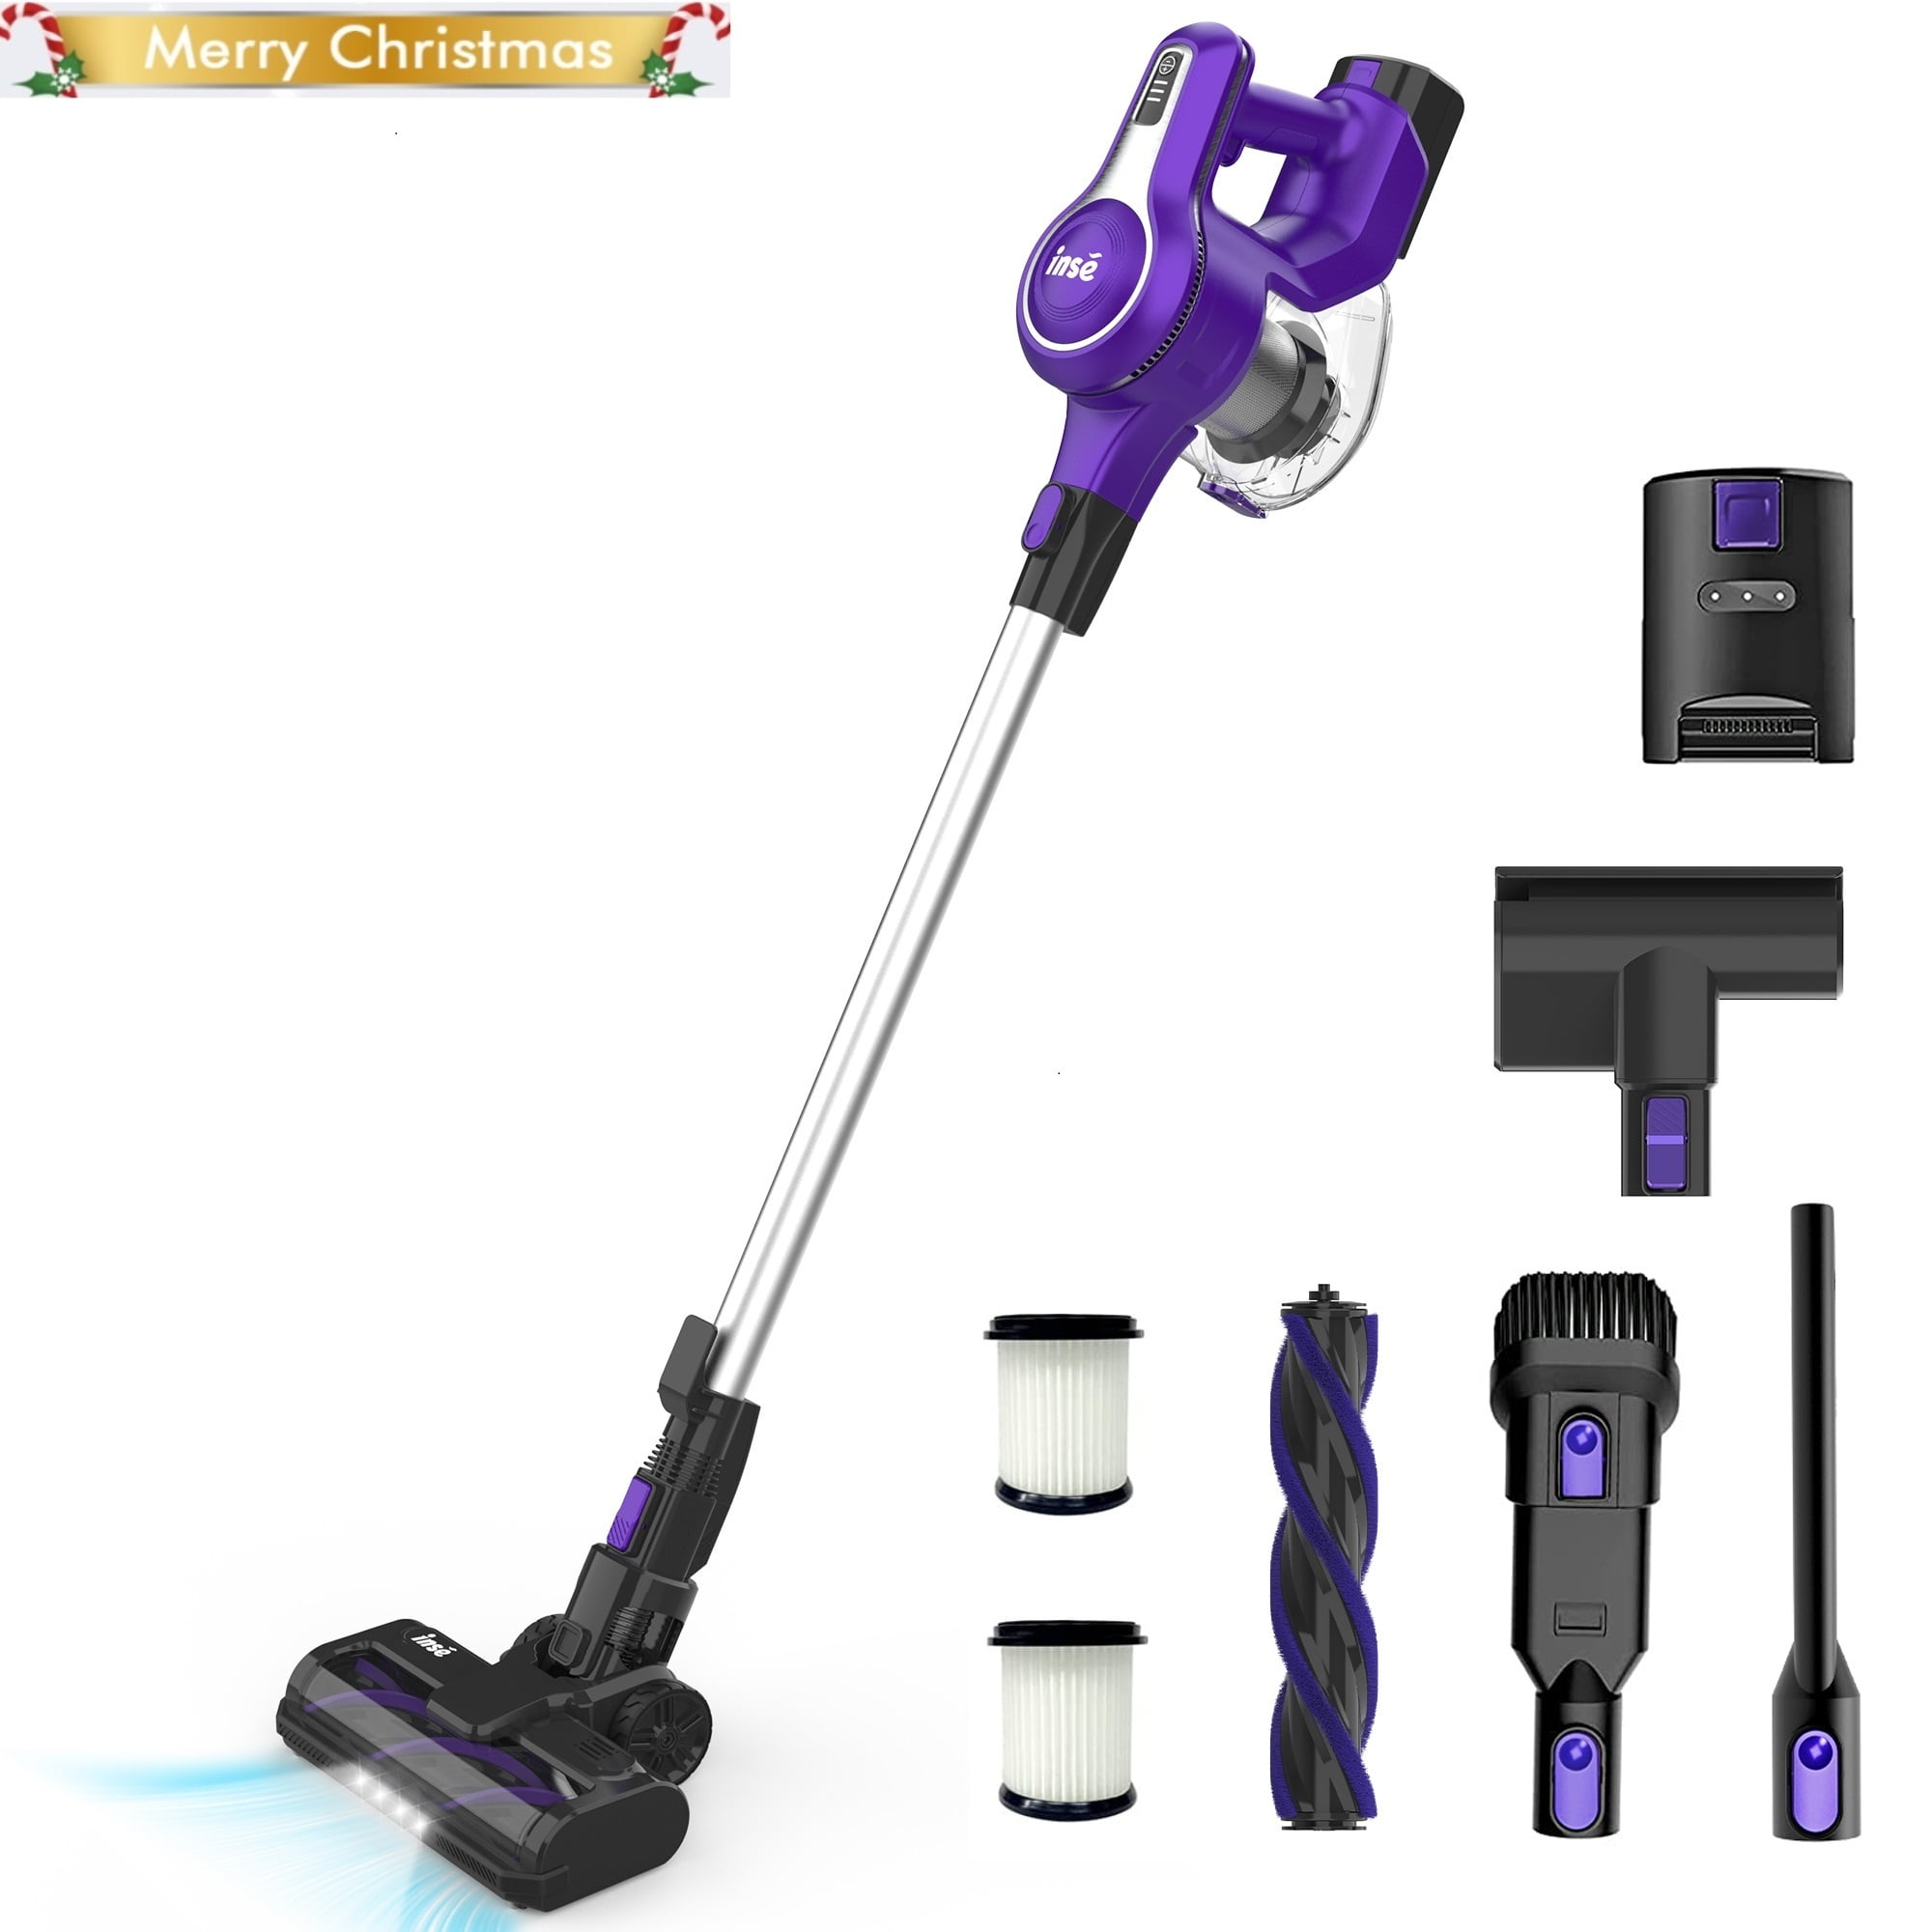 This Black + Decker Cordless Vacuum Is on Sale for Under $150 at